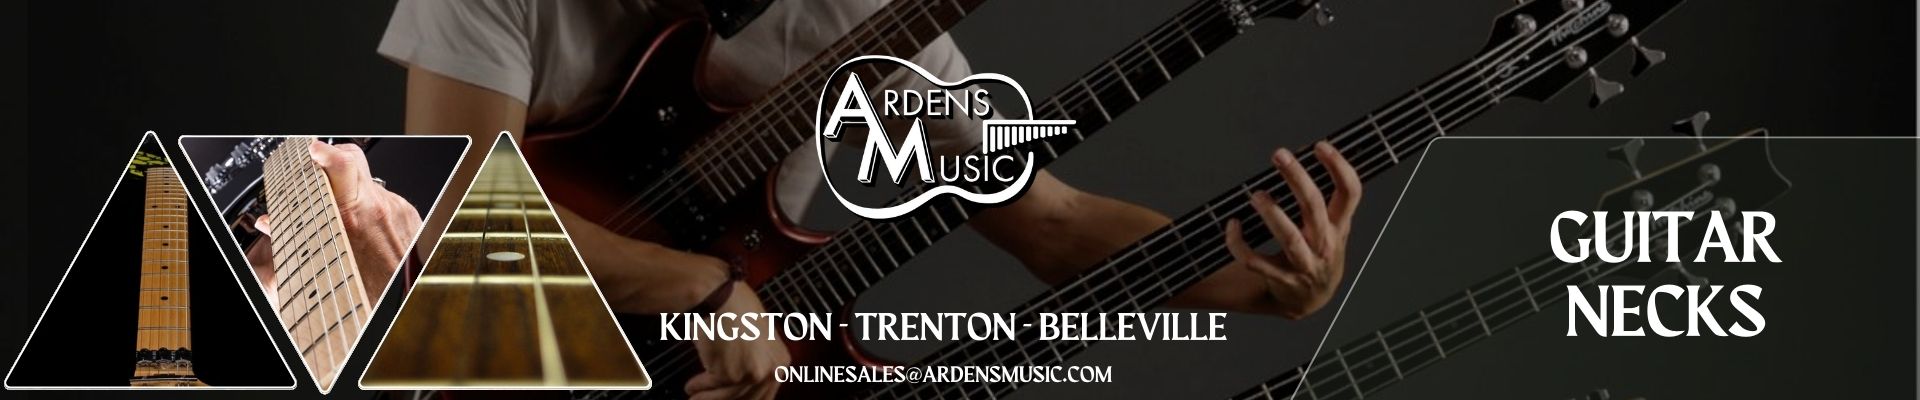 Whether you need replacement knobs or a whole new bridge, Arden's offers a range of hardware from brands like Fender, Profile, and Gibson.